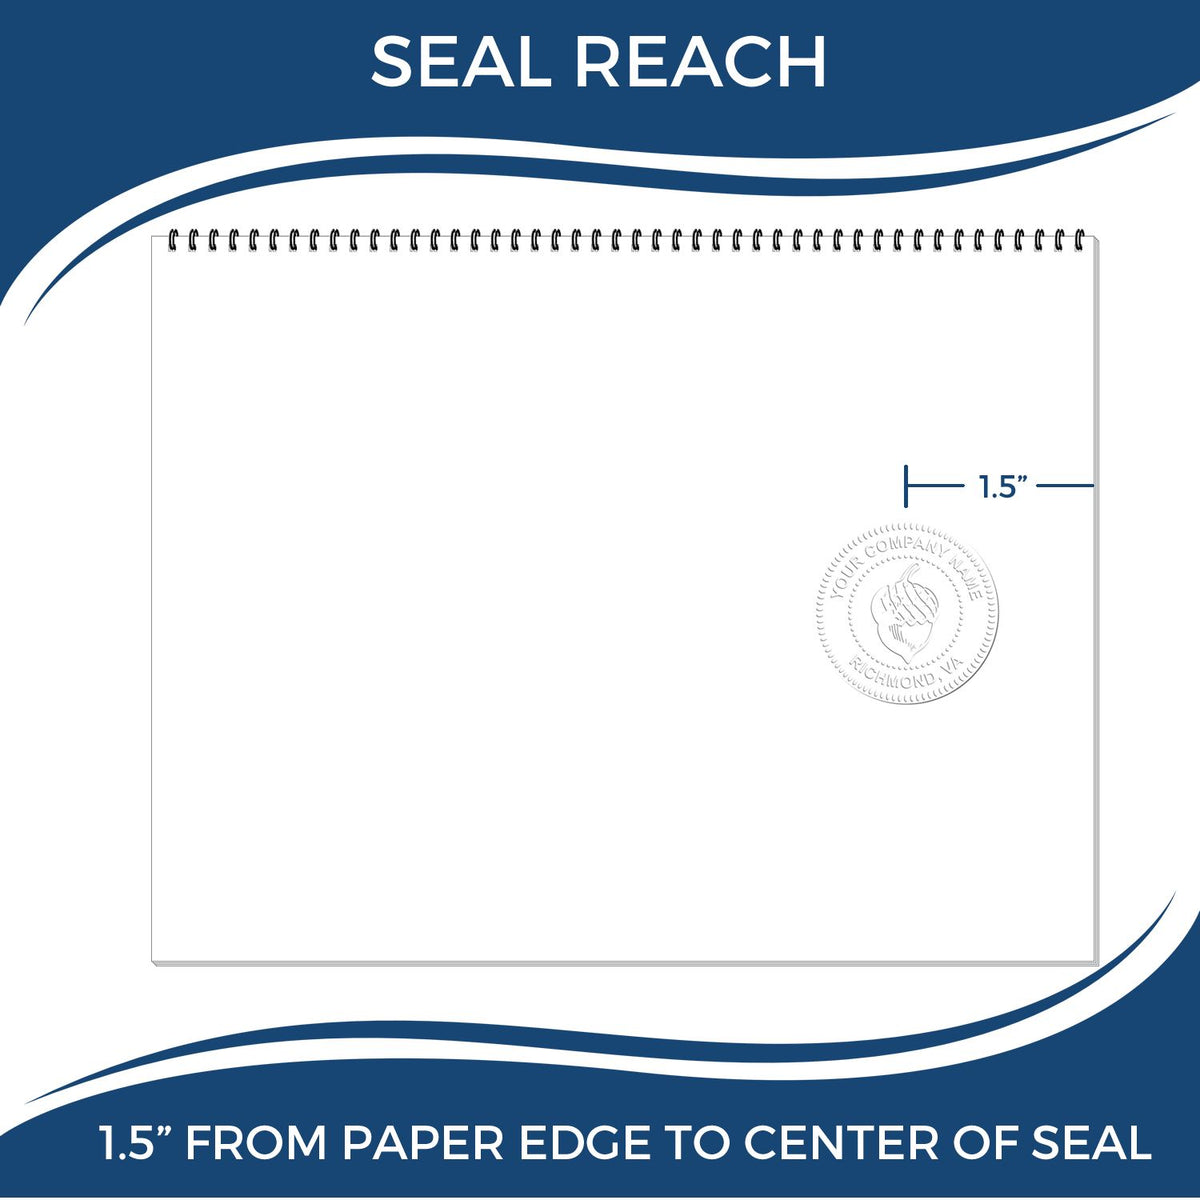 An infographic showing the seal reach which is represented by a ruler and a miniature seal image of the Colorado Geologist Desk Seal